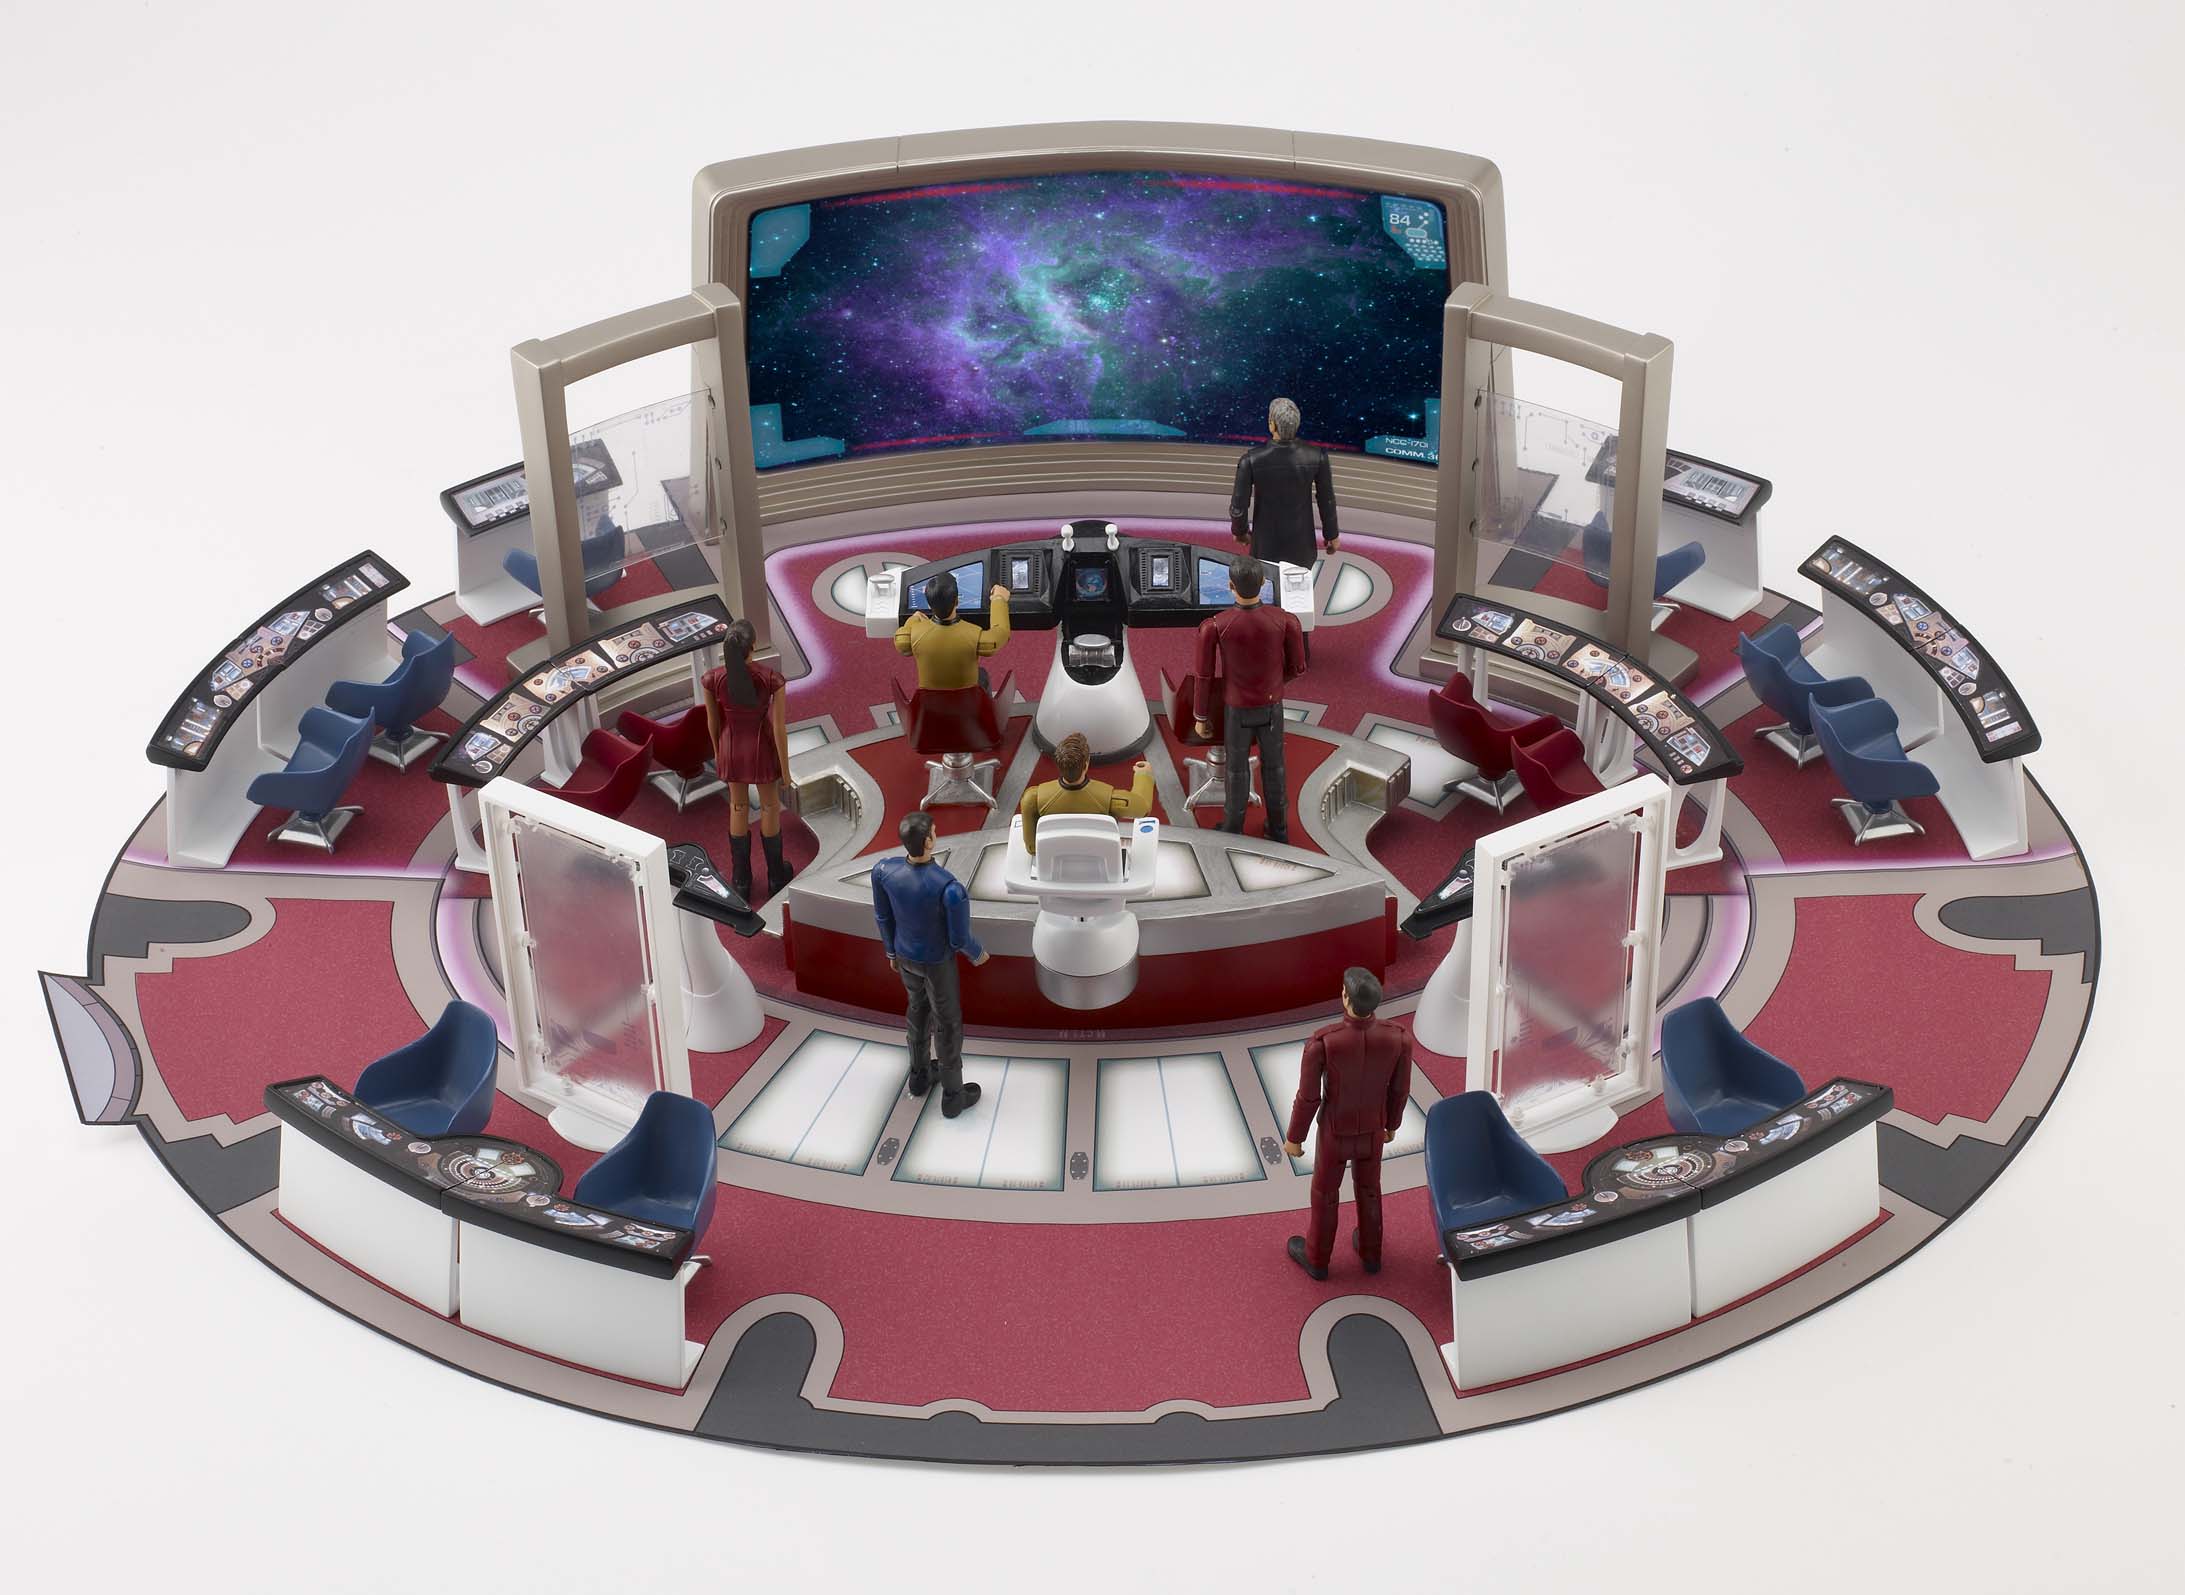 Interactive playset simulates 'Transport feature' from Star Trek movie.